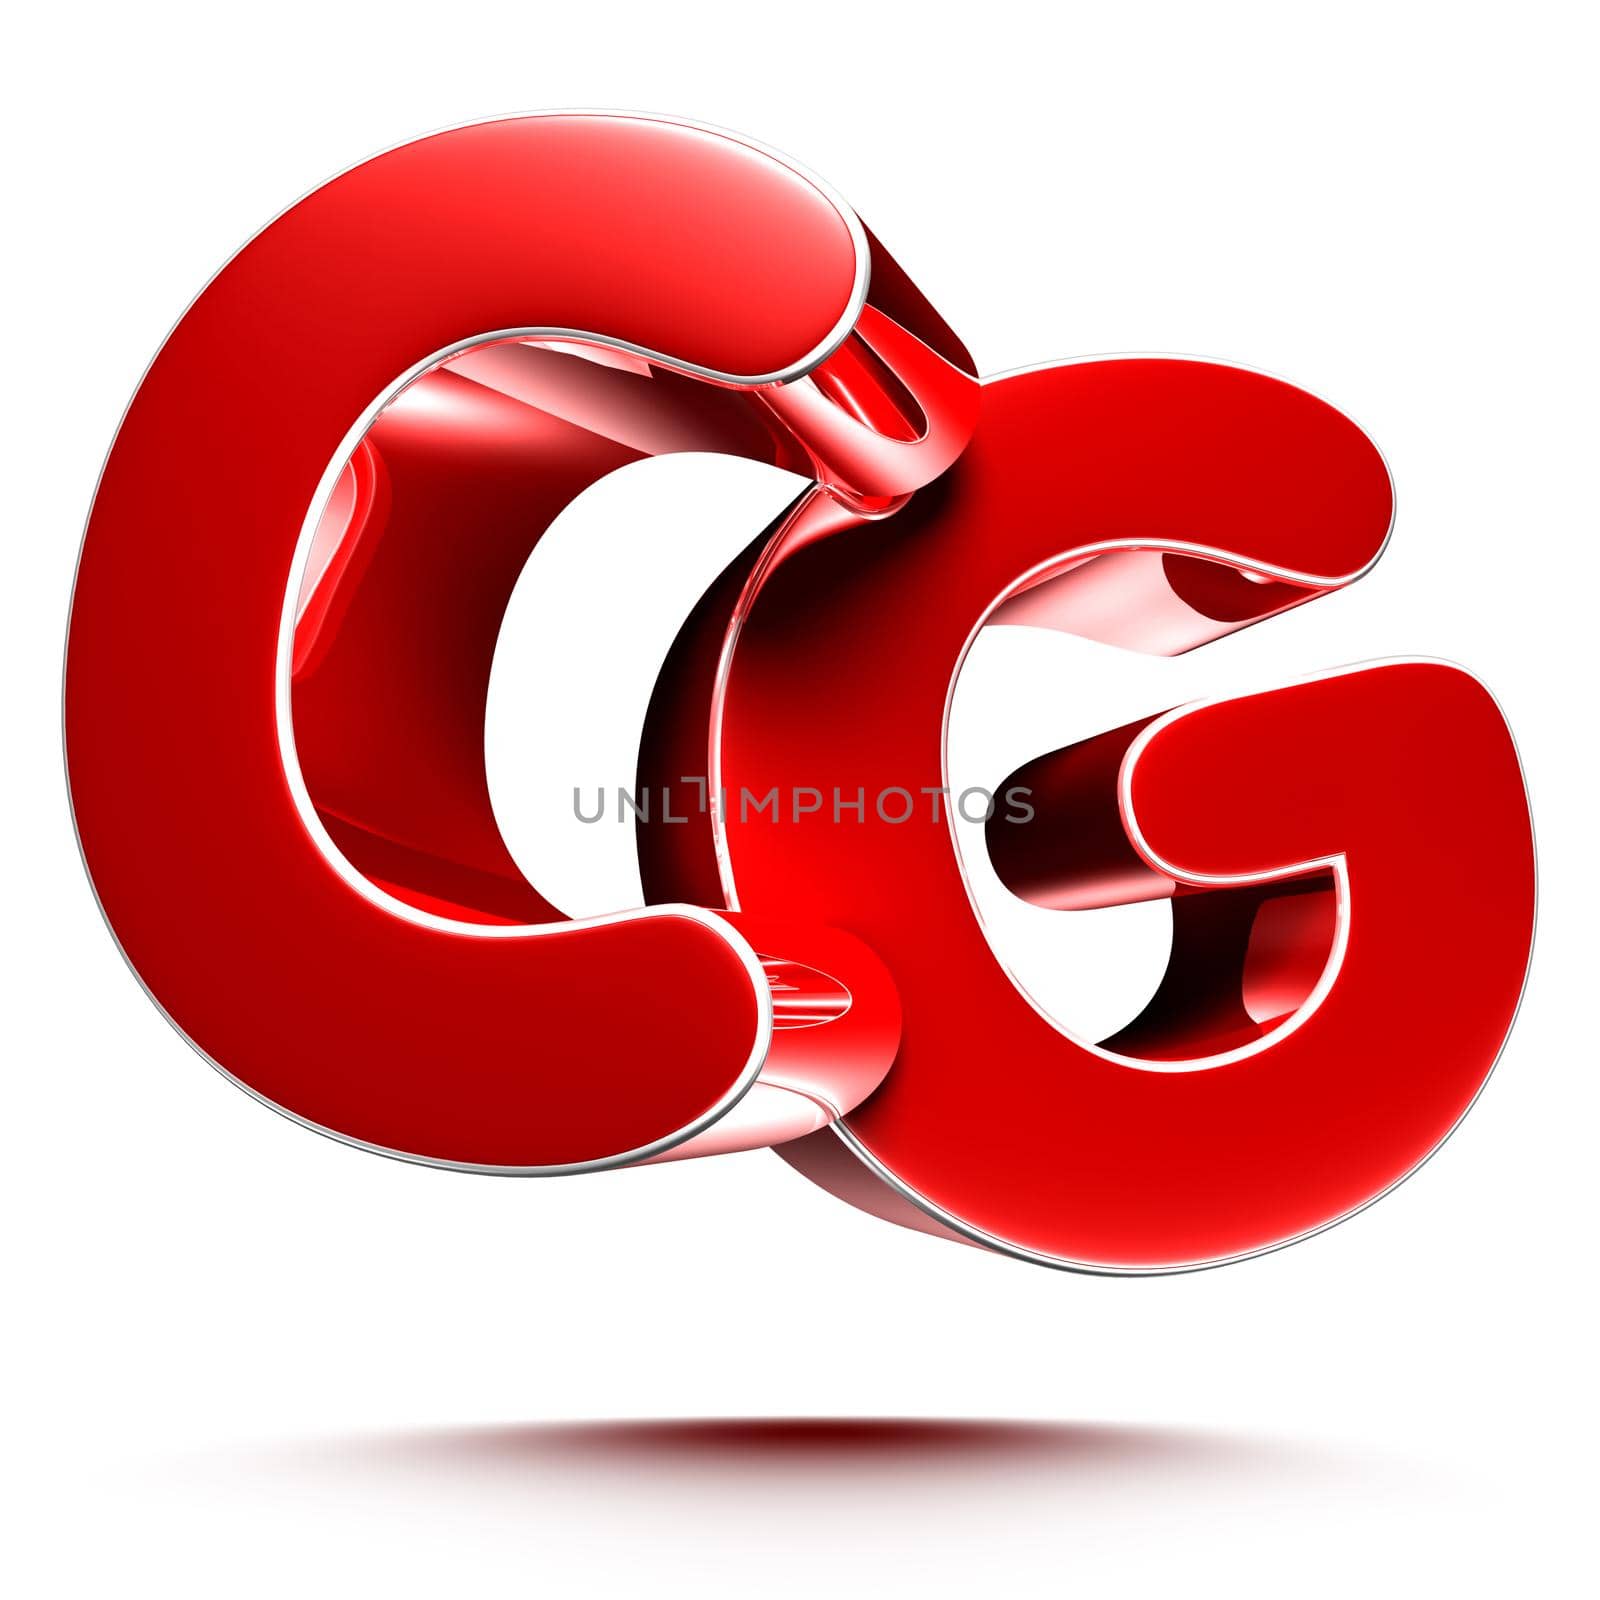 CG red 3D illustration on white background with clipping path.